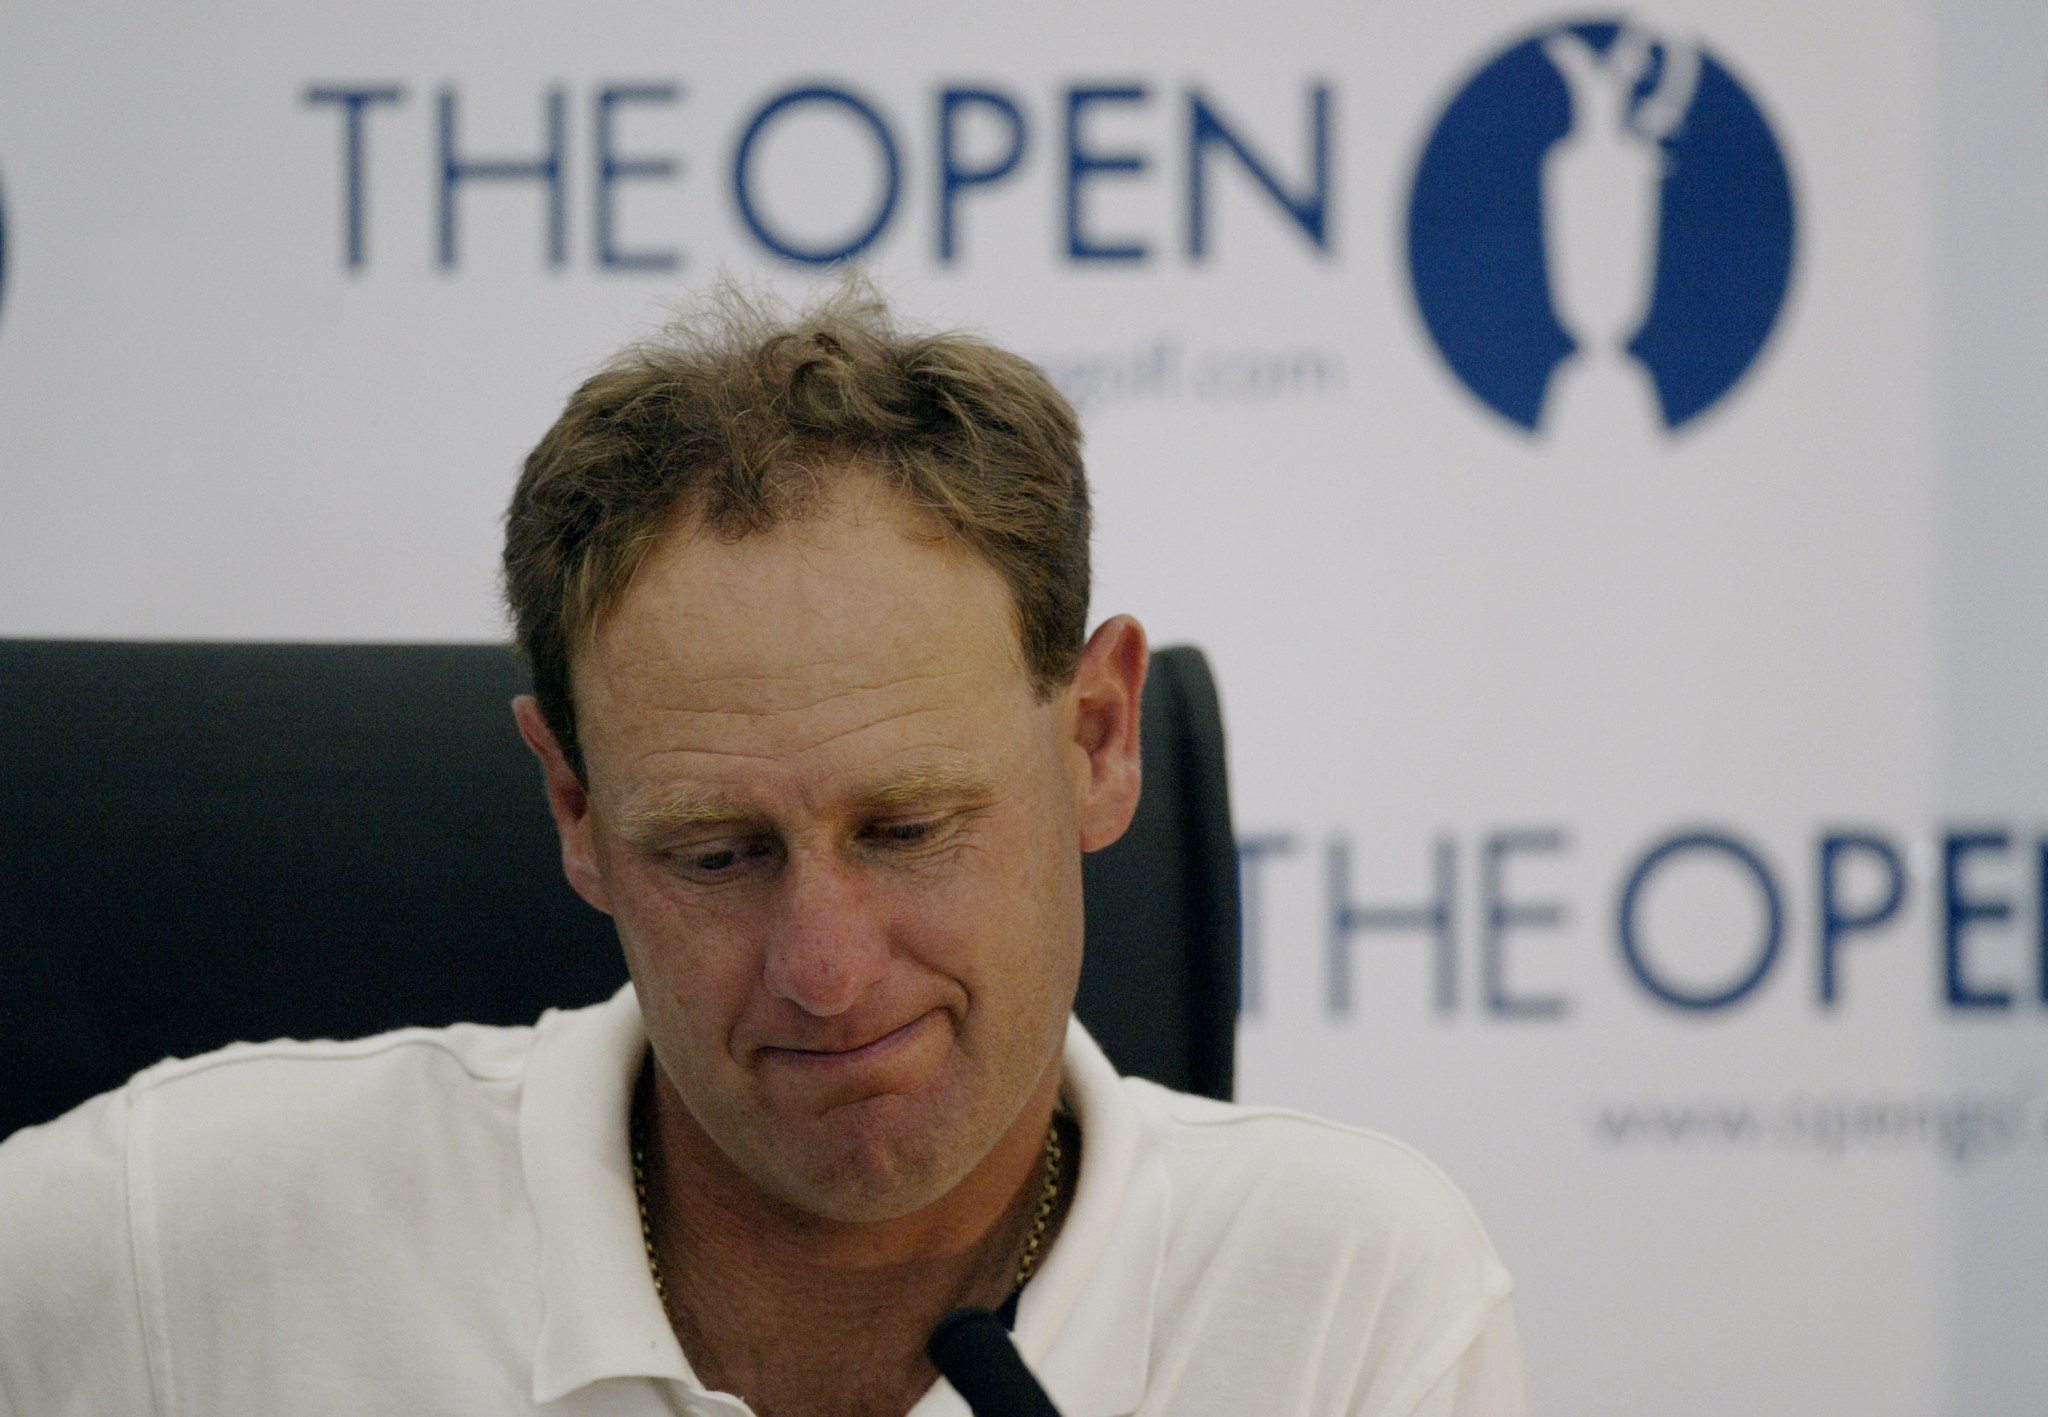 Mark Roe was disqualified at the 2003 British Open after failing to swap scorecards with his playing partner ©Getty Images